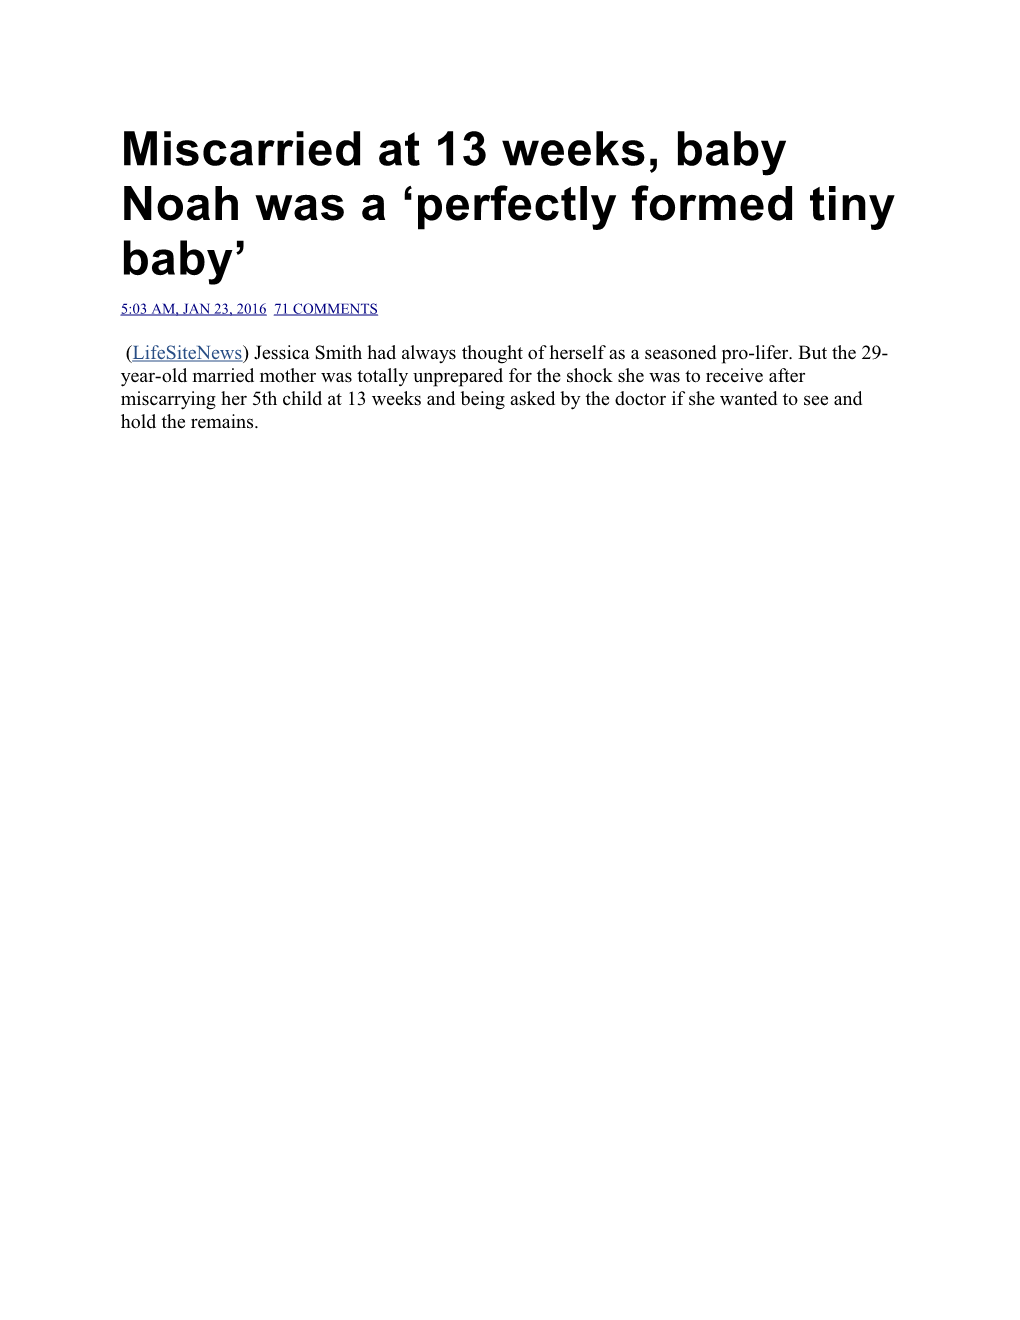 Miscarried at 13 Weeks, Baby Noah Was a Perfectly Formed Tiny Baby